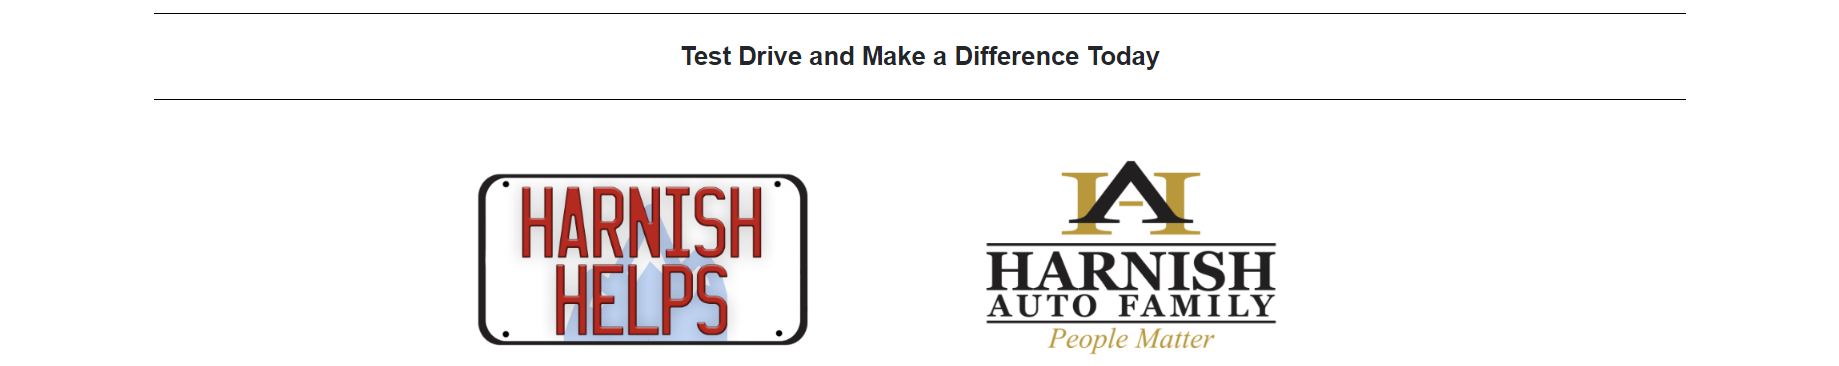 Test Drive and Make a Difference Today